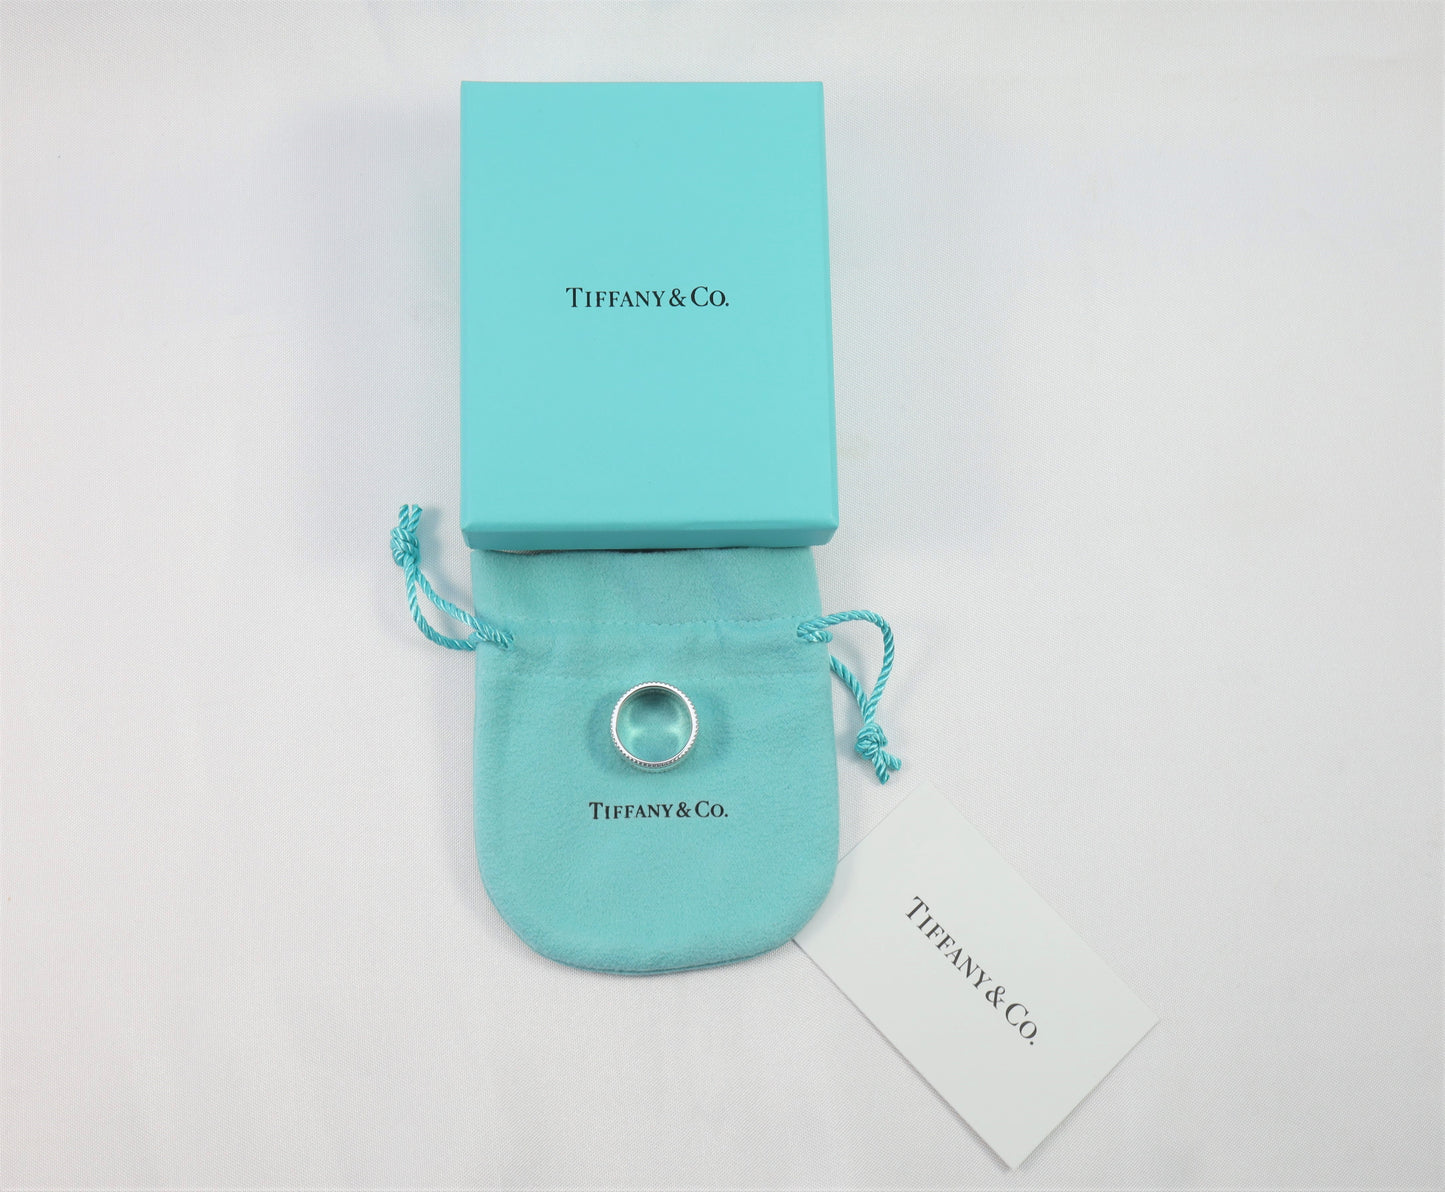 NEW Tiffany & Co. Sterling Silver Beaded Edge "I Love You" Ring, Size 4.5 - 6.6g